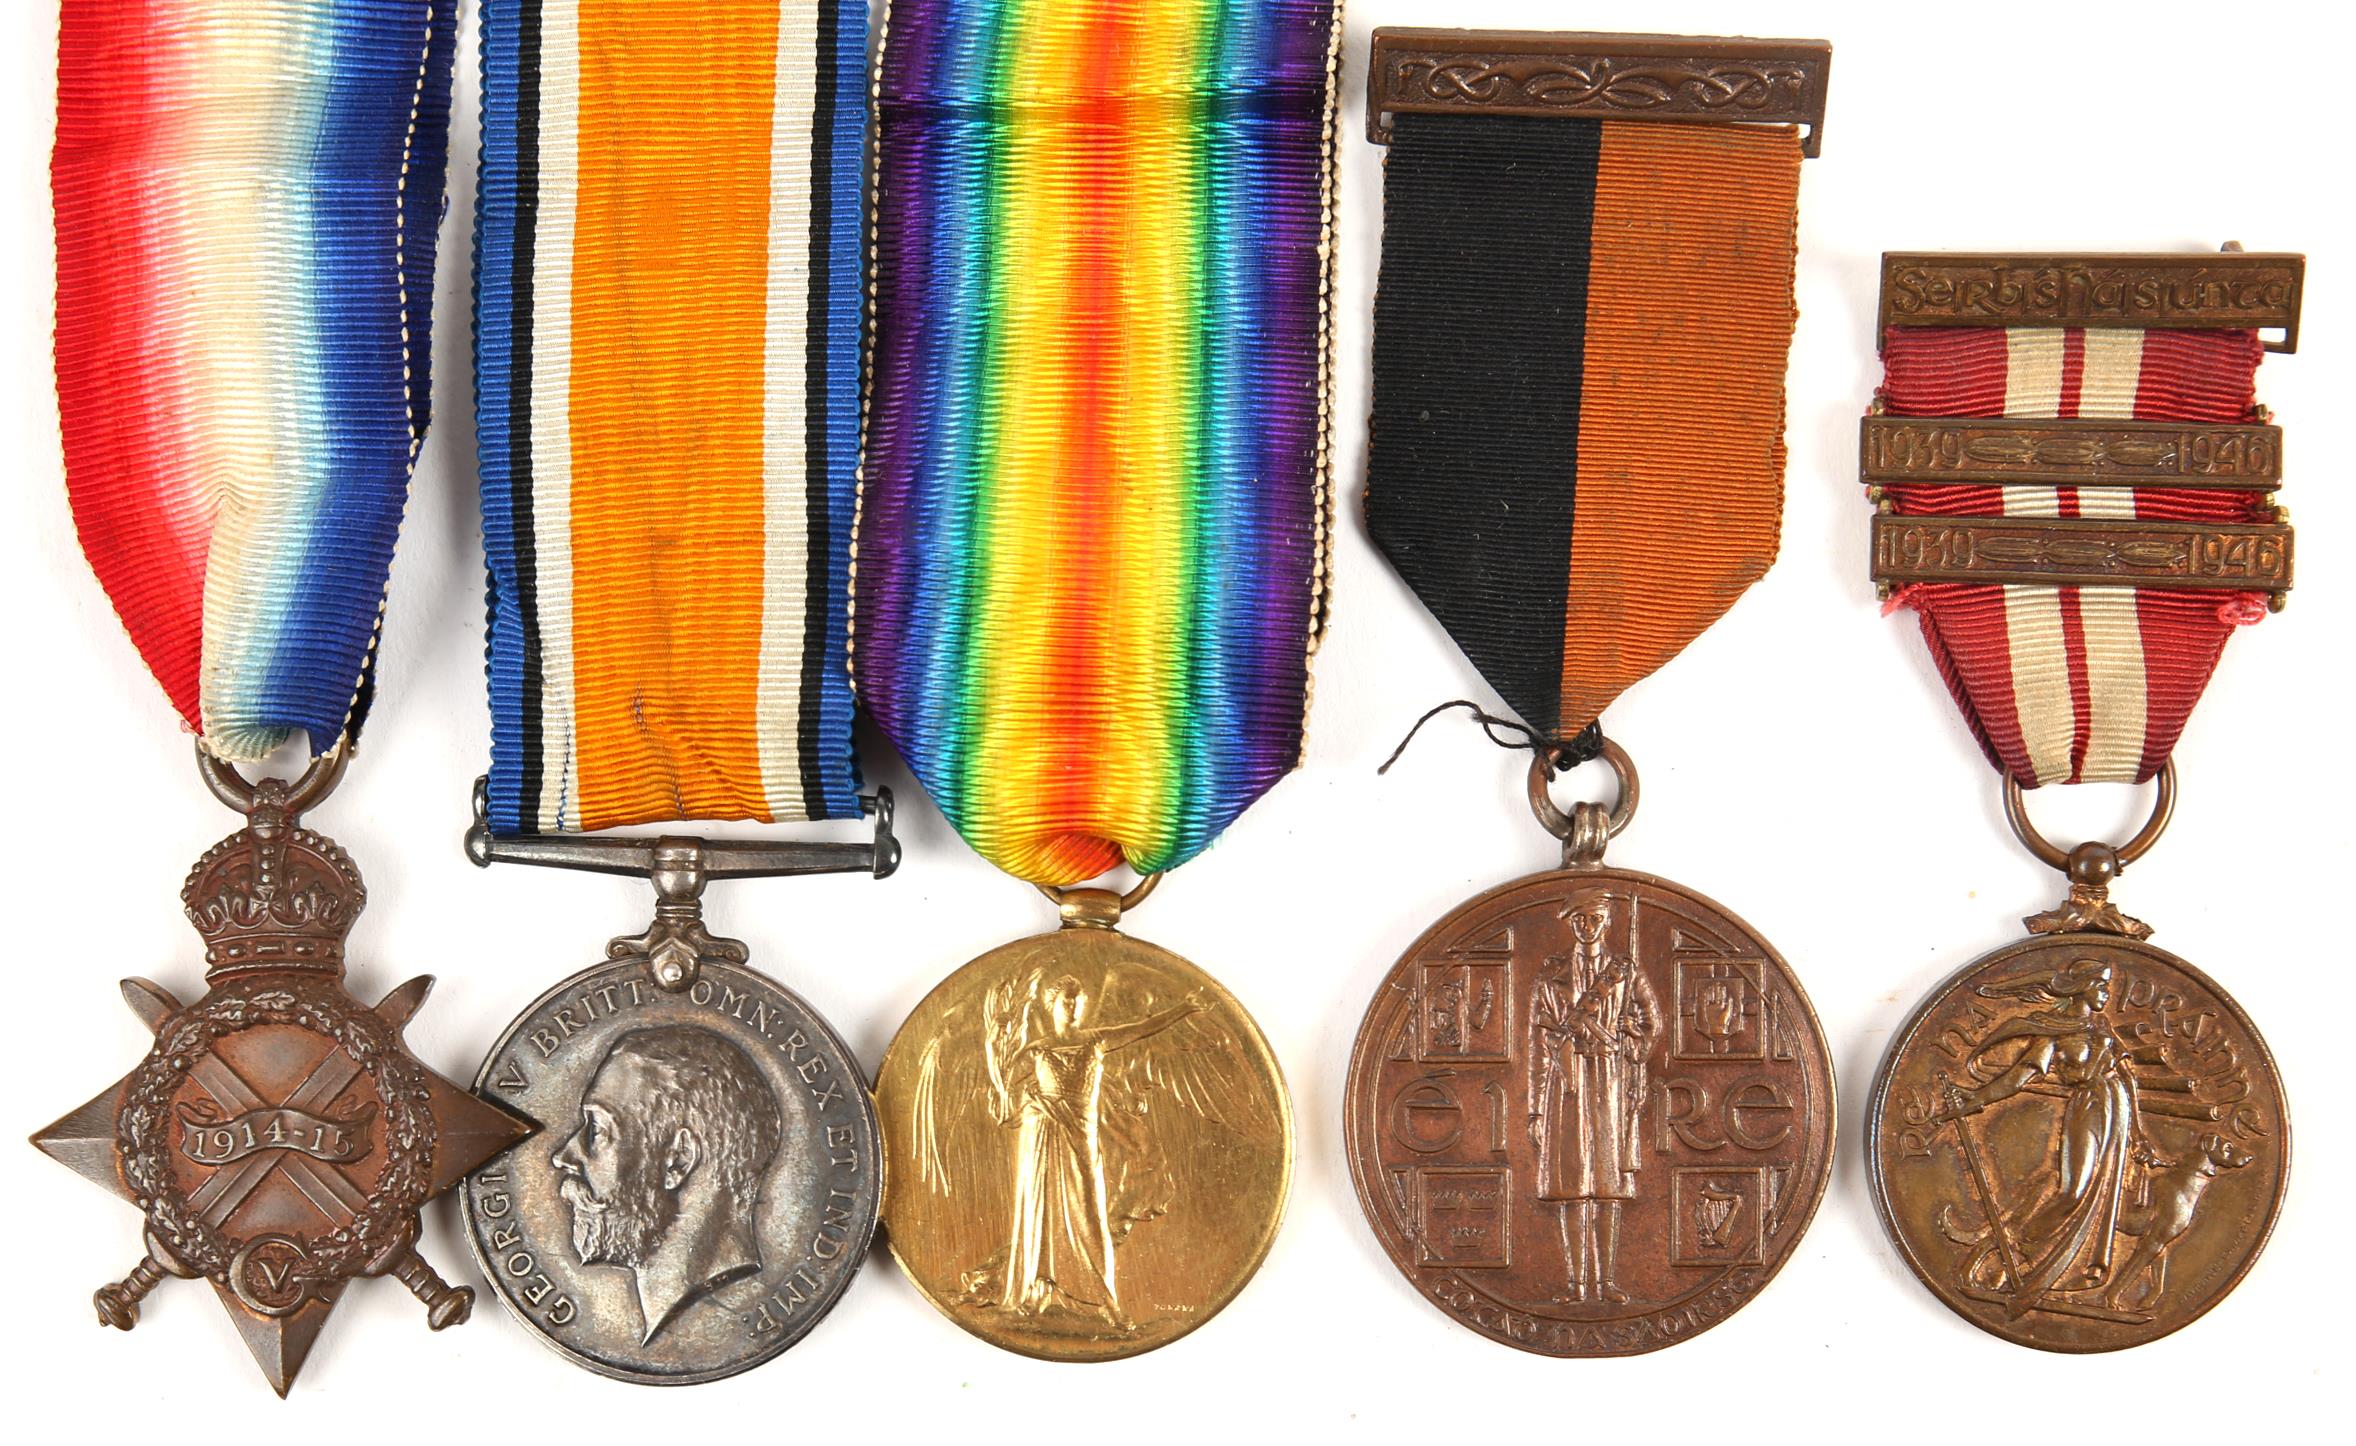 1914-18 trio and War of Independence Medals to Despatch Rider James Skinner from Ringsend, Dublin.